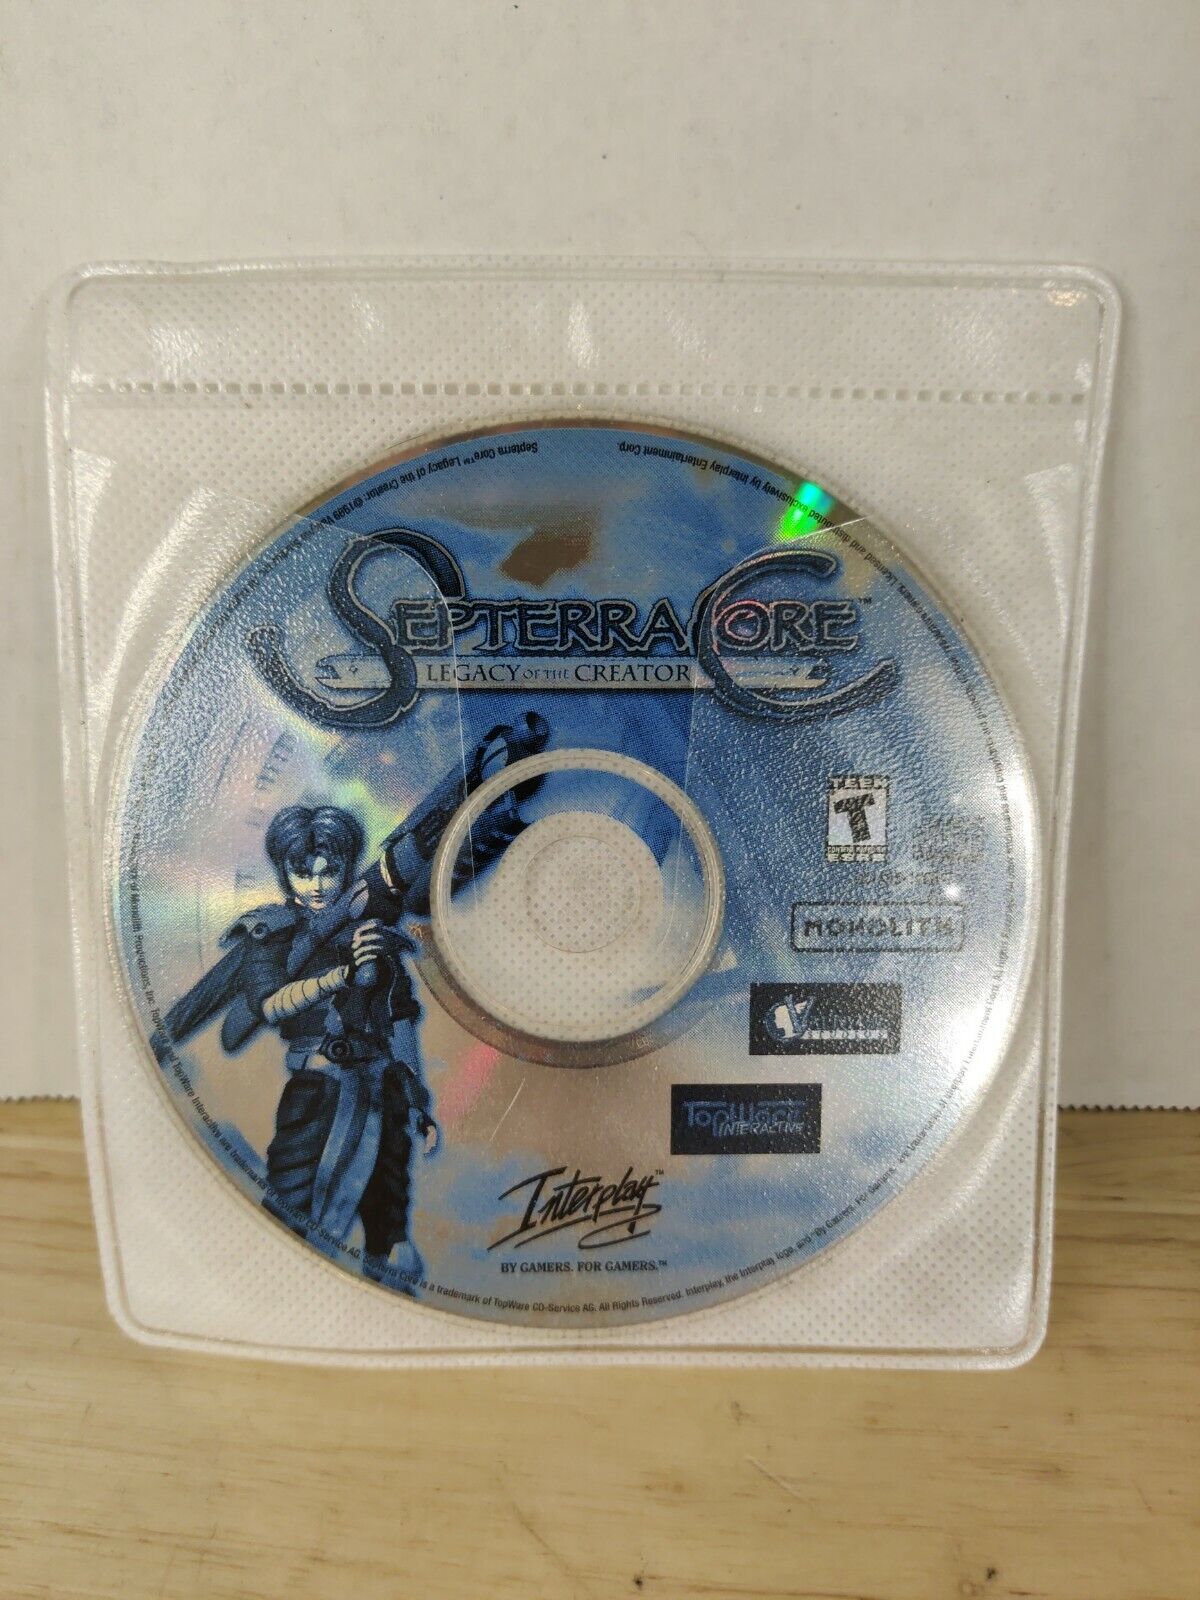 Septerra Core Legacy of the Creator (PC, 1999) CD-ROM Game